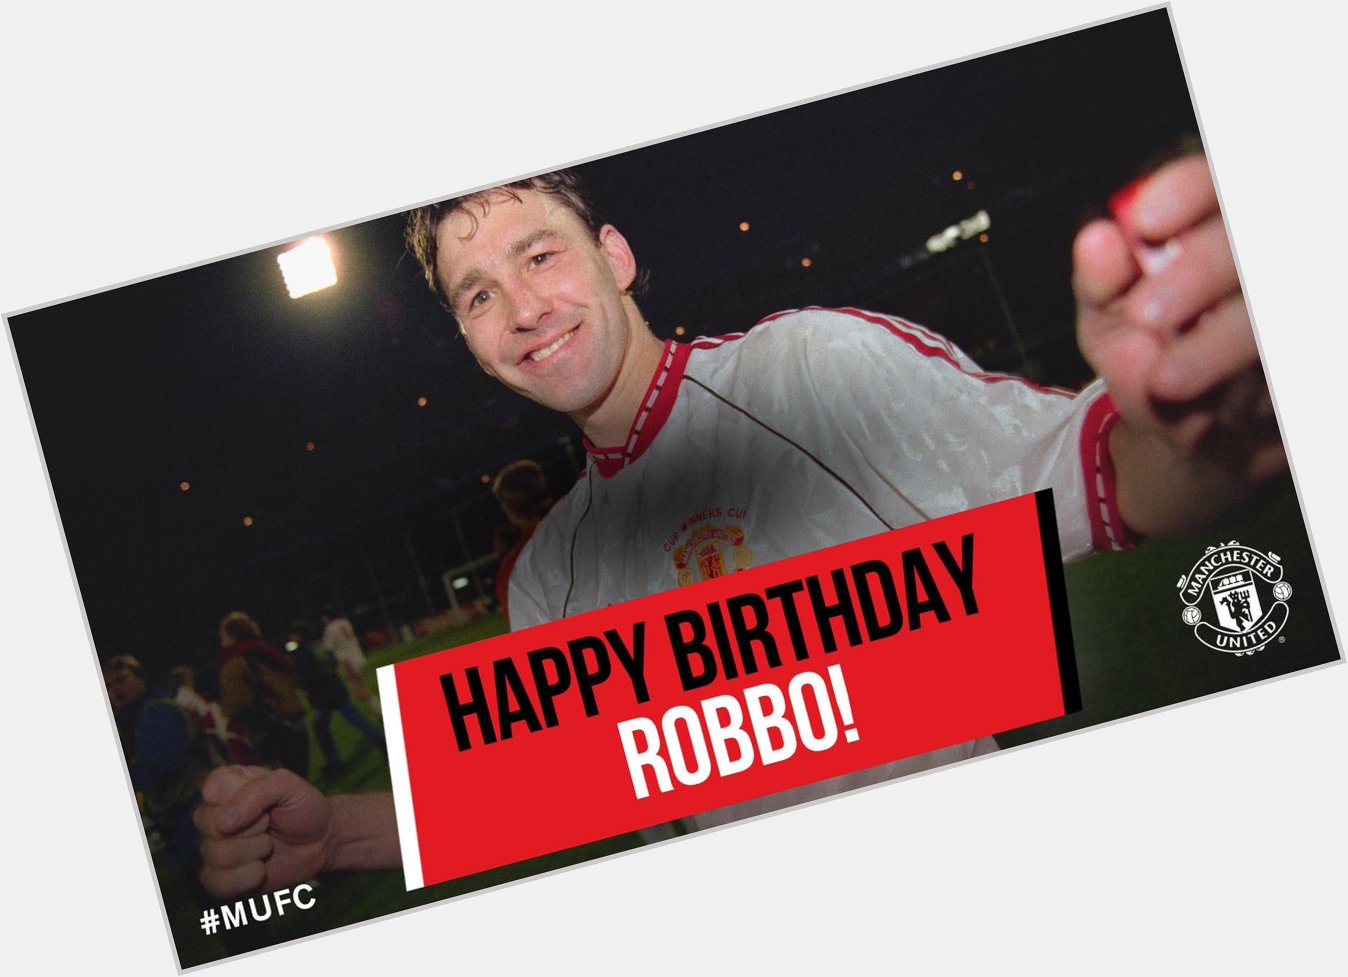 Happy birthday Bryan Robson - have a great day! 